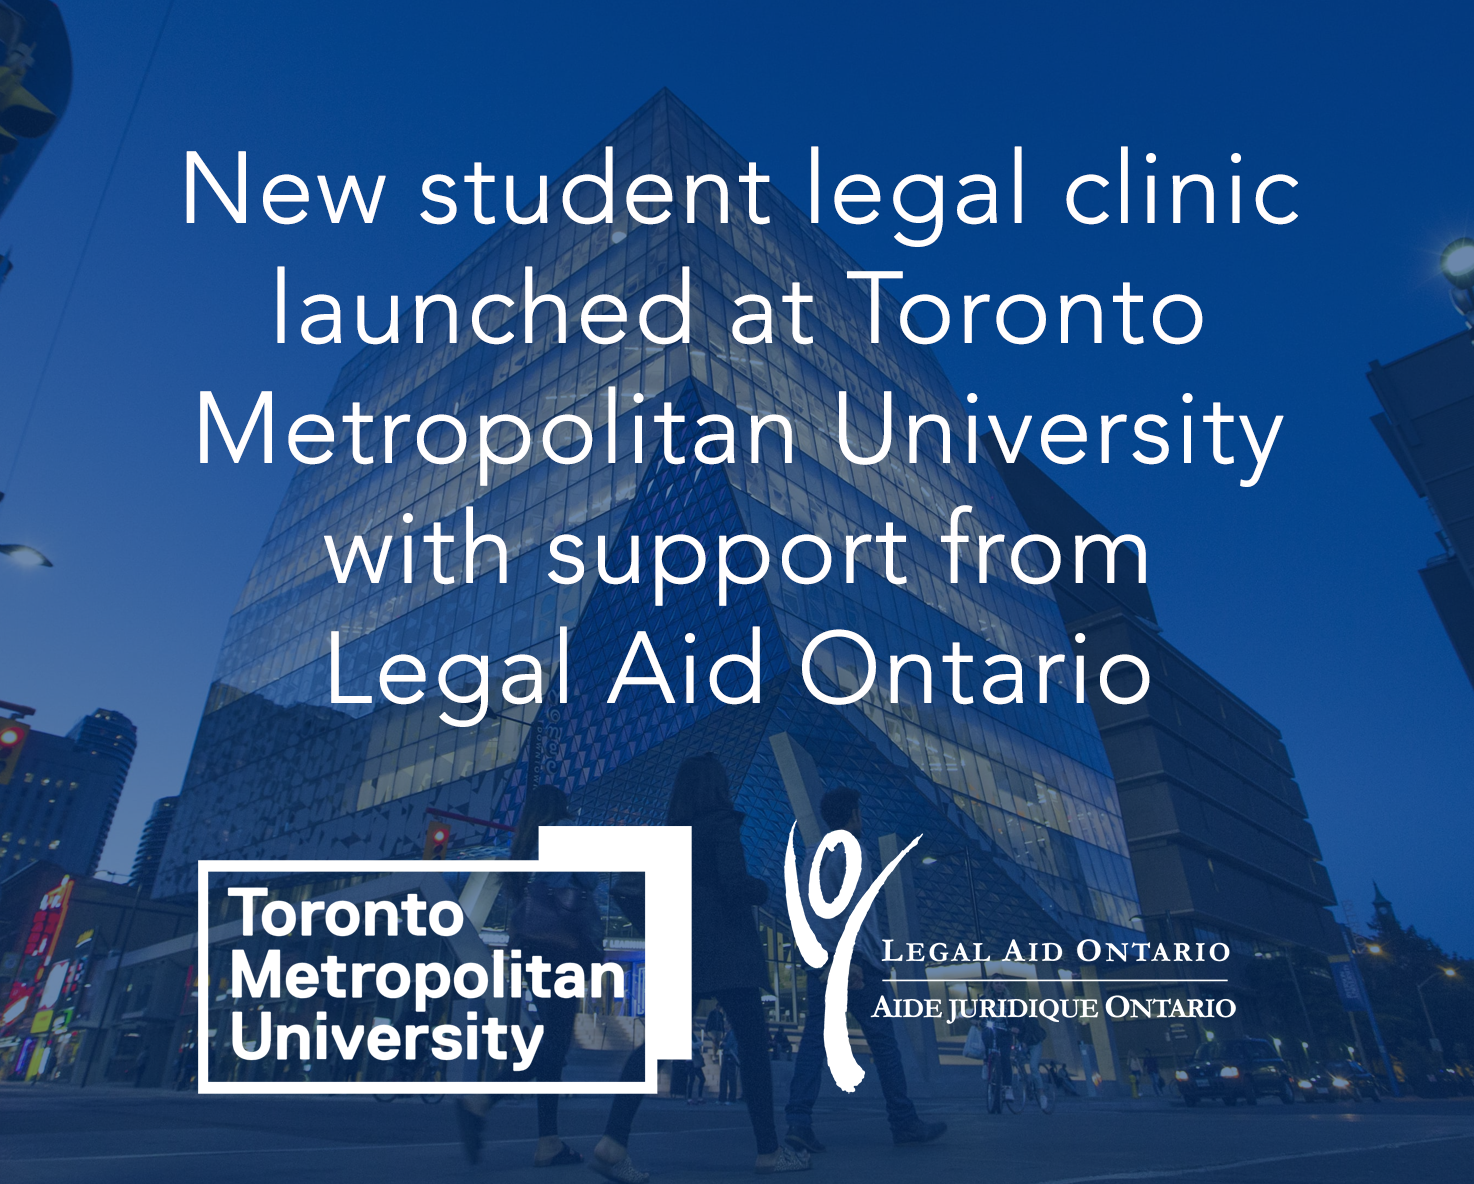 New student legal clinic launched at Toronto Metropolitan University with support from Legal Aid Ontario